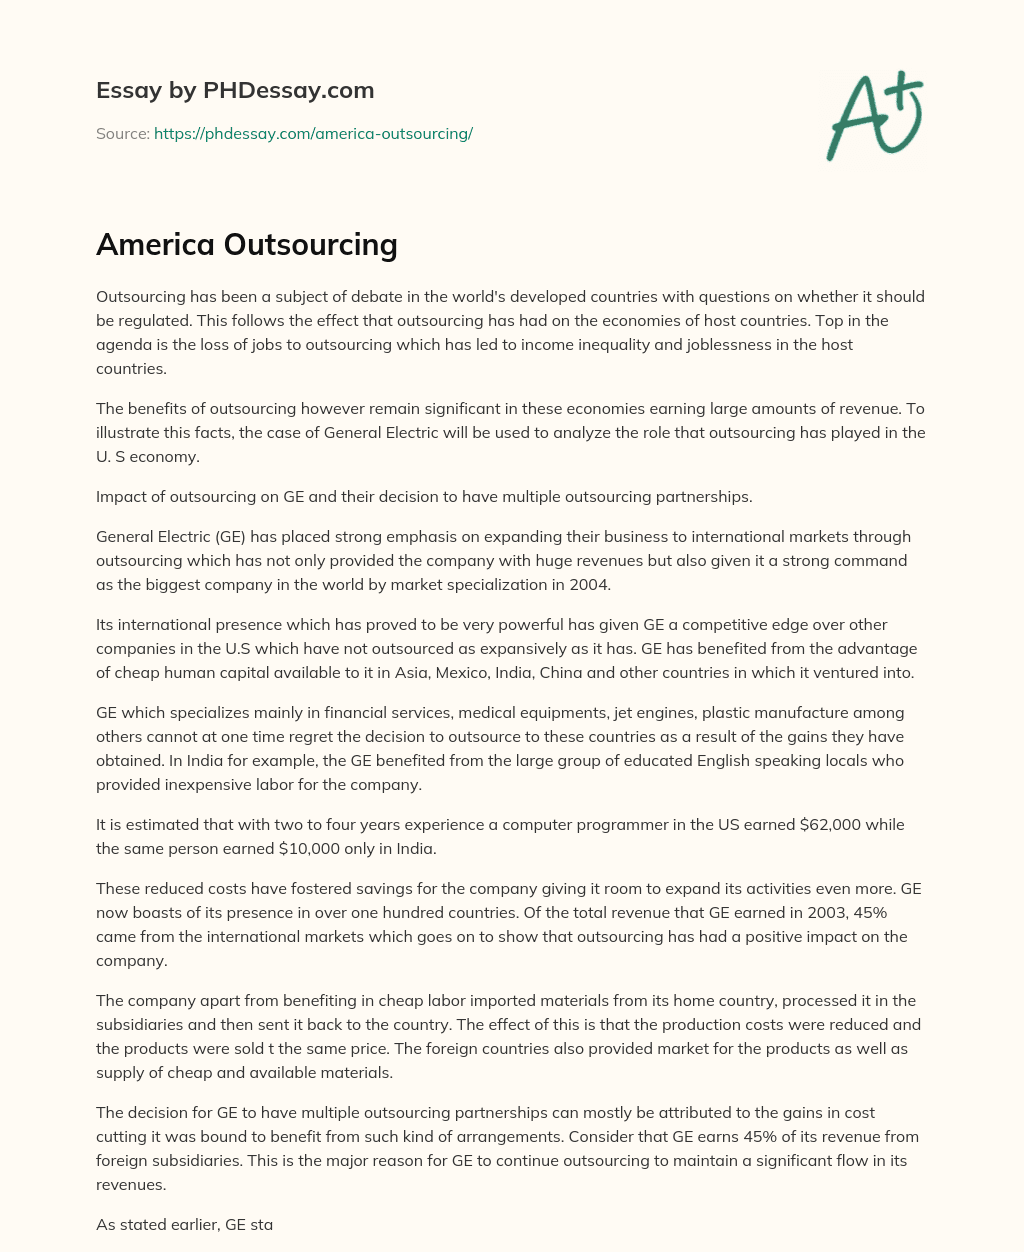 America Outsourcing essay